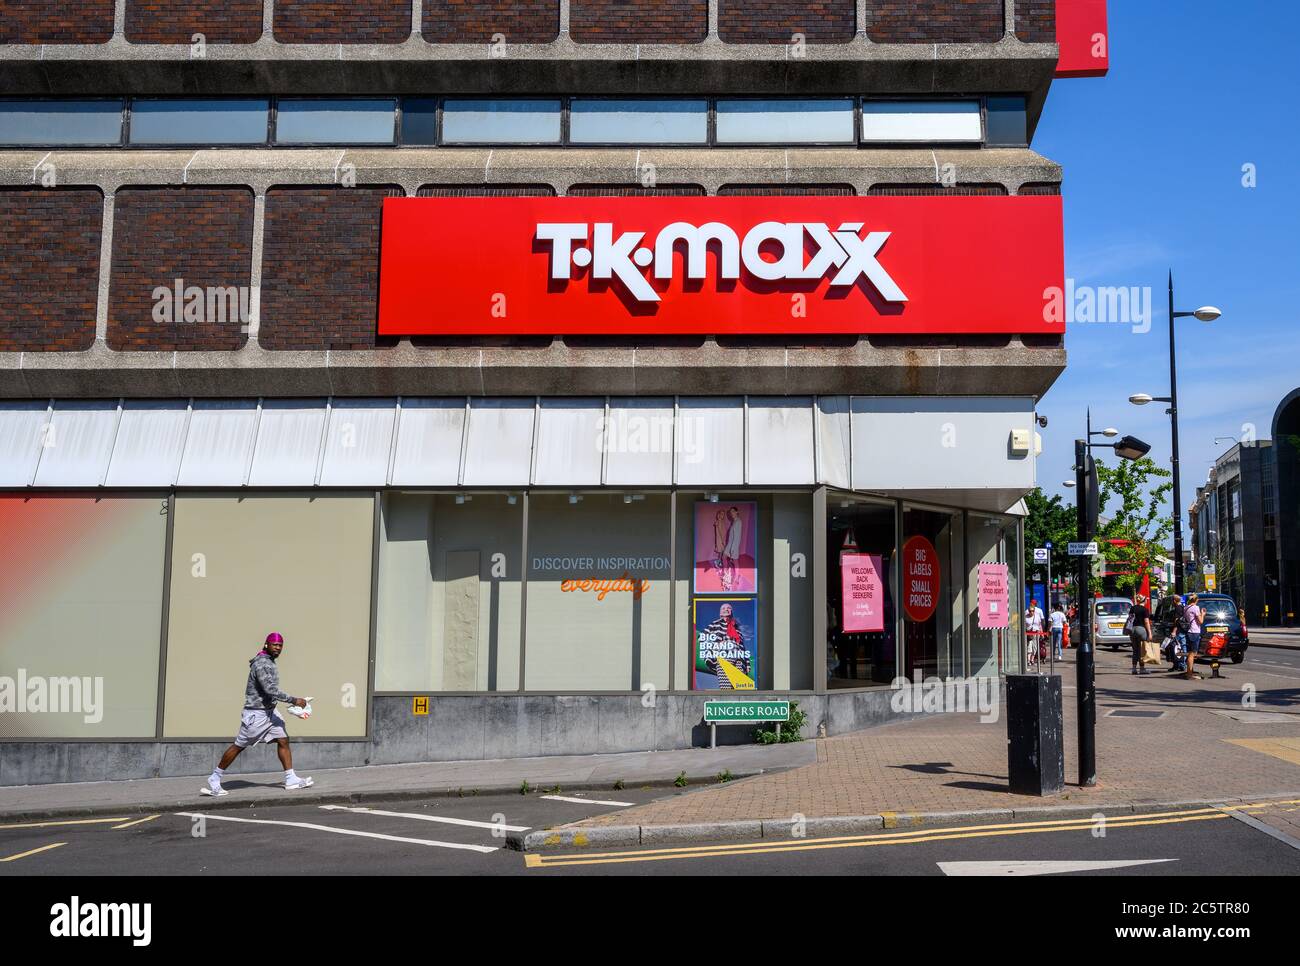 Bromley (Greater London), Kent, UK. TK Maxx store in Bromley High Street and Ringers Road showing the TK Maxx logo. View of the road and a pedestrian. Stock Photo